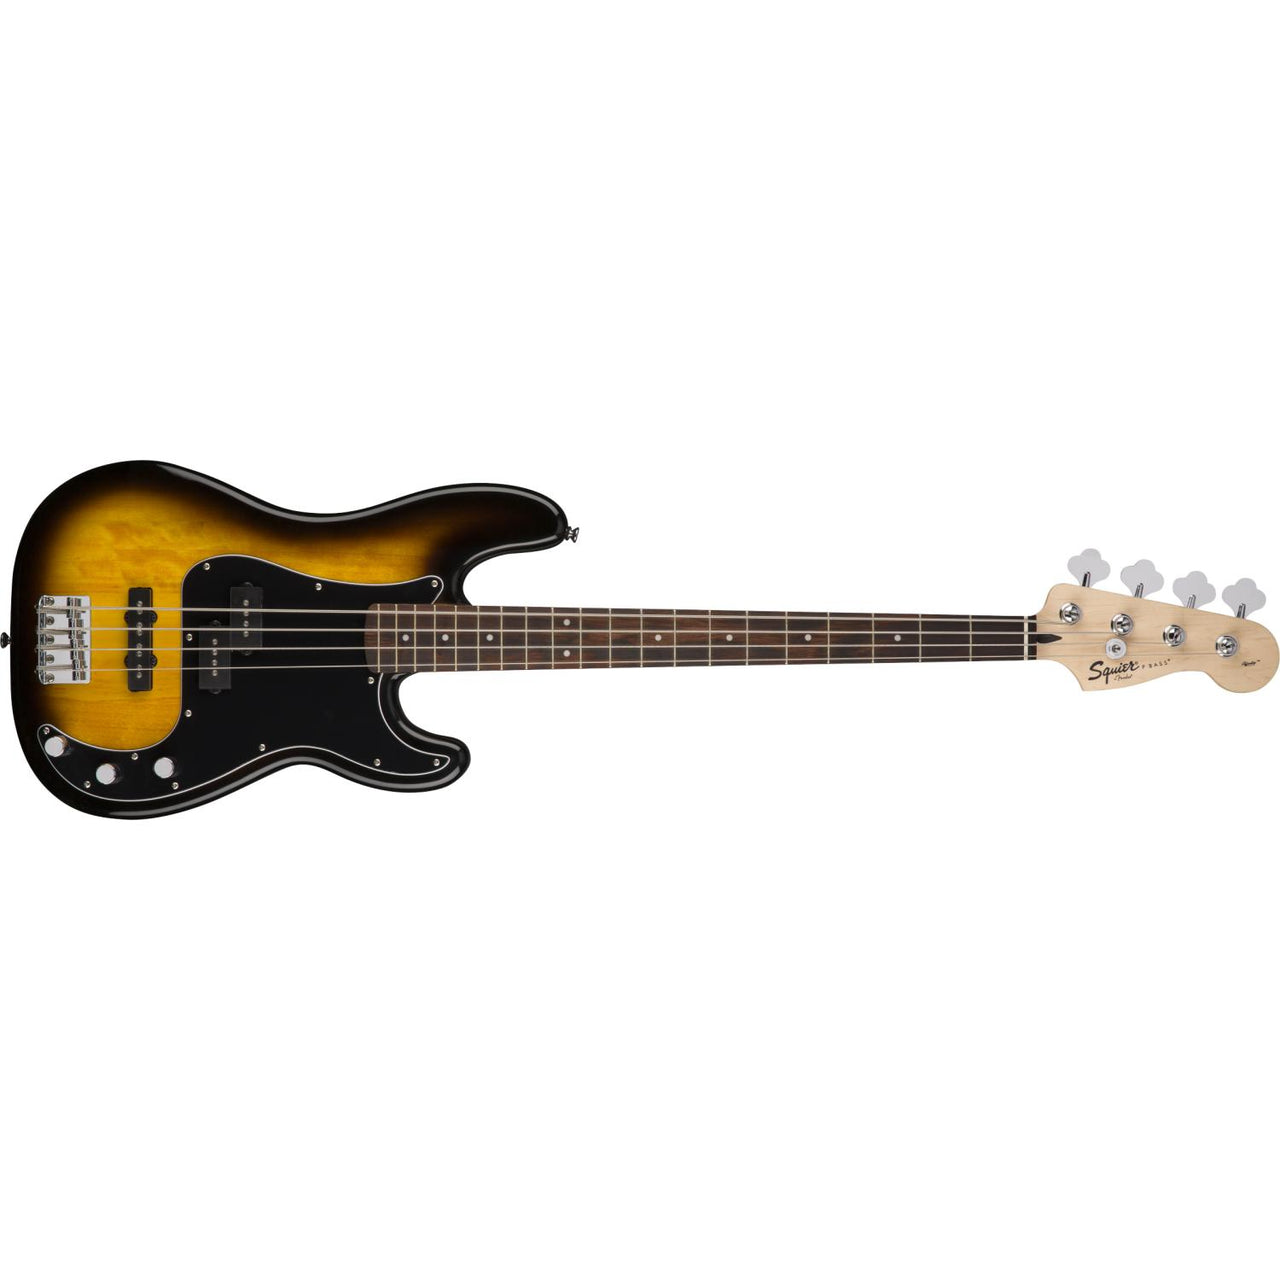 Paquete Bajo Electrico Fender Pk Bass Bsb  0371982032